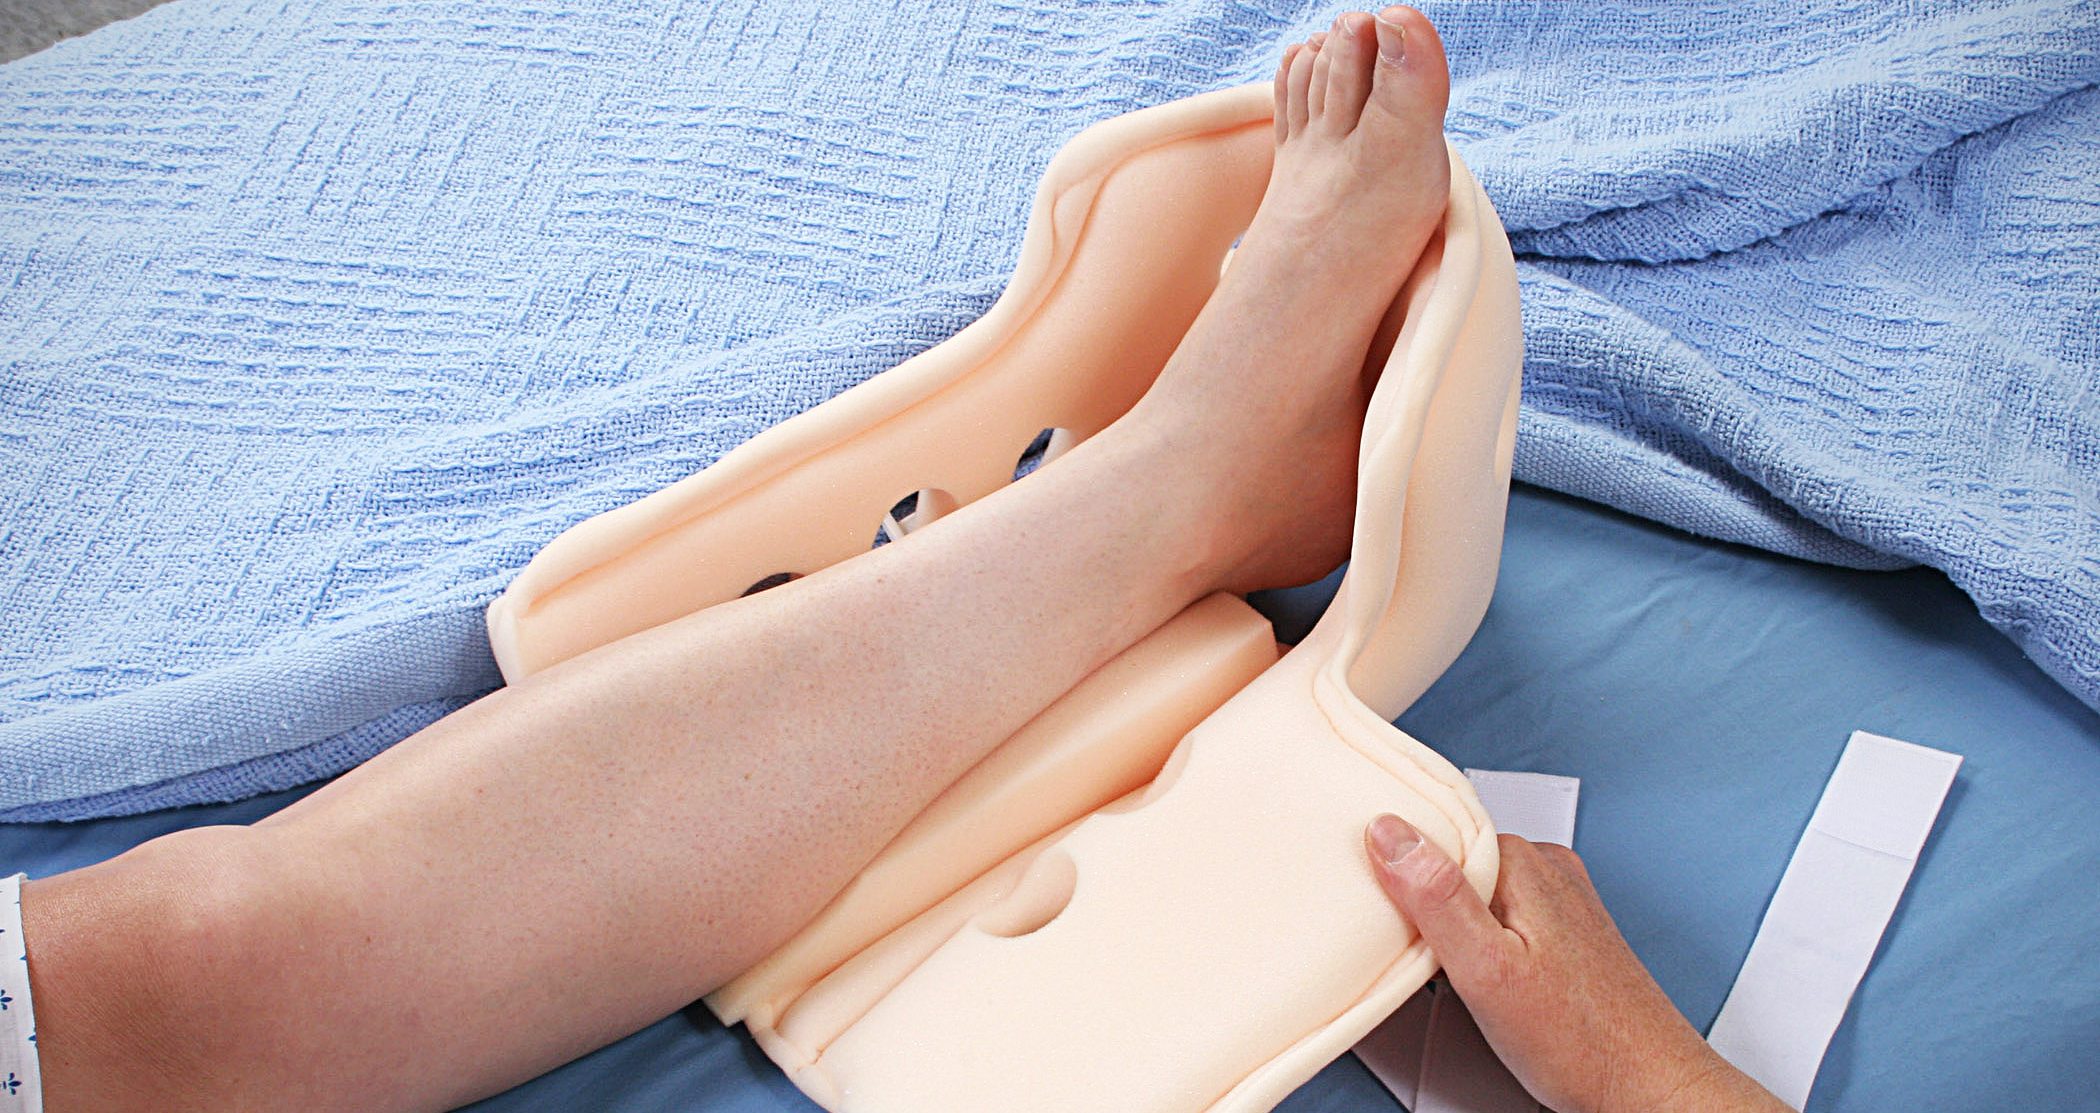 Supine Position Reduces Pressure Ulcers